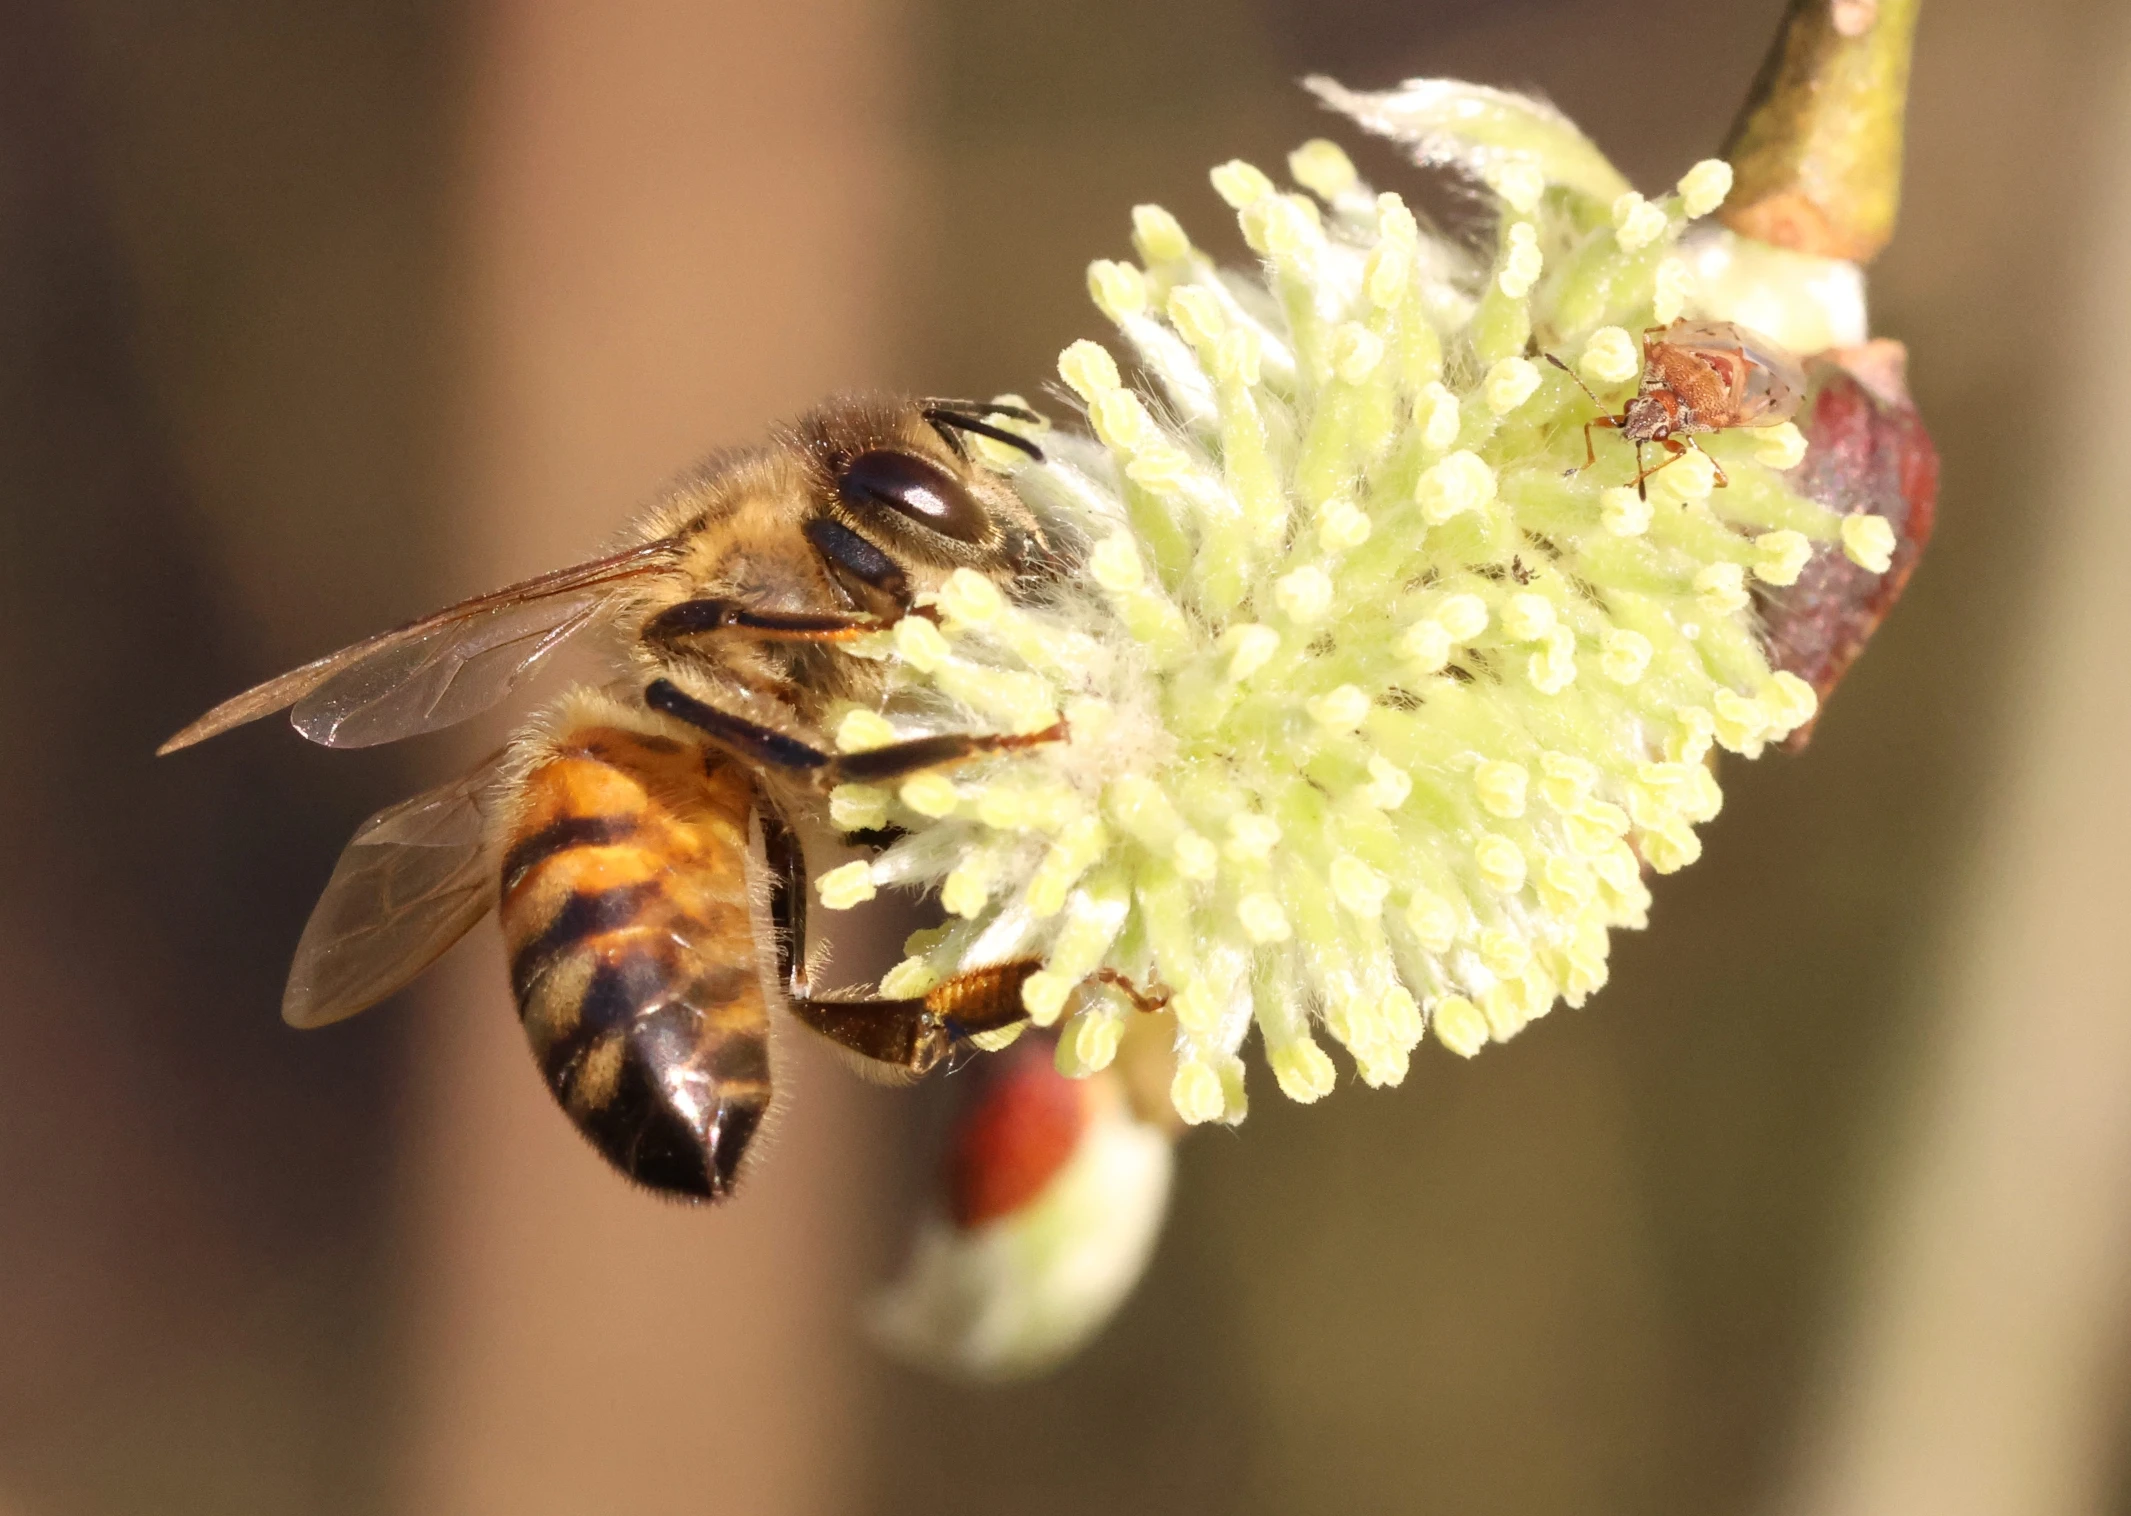 Bee foraging on a willow bud, with a tiny bug on the bud